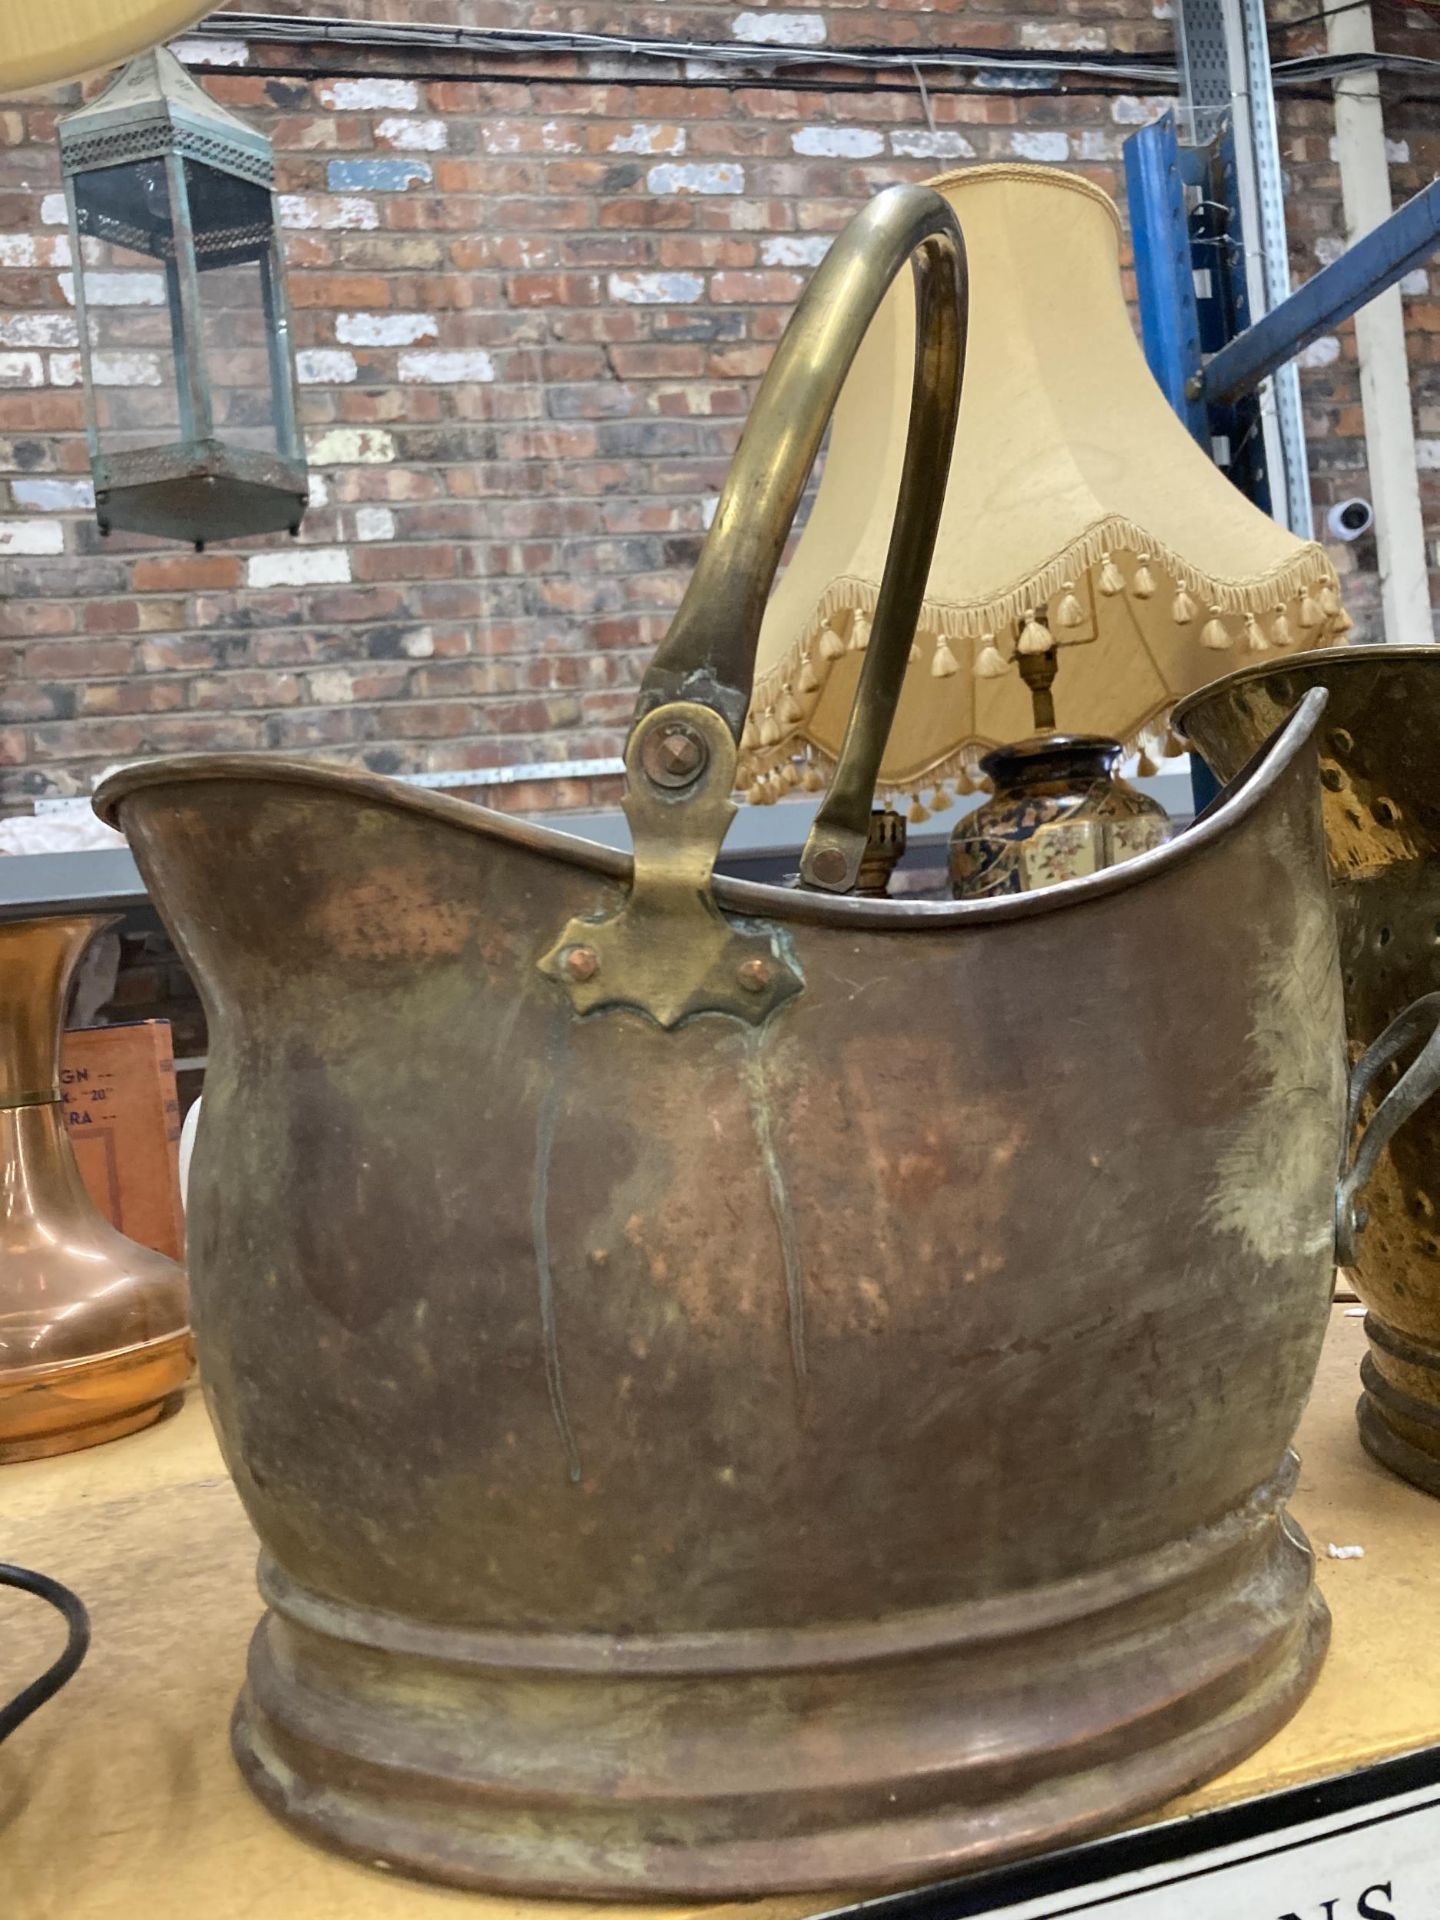 TWO VINTAGE HELMET COAL SCUTTLES, ONE BEING HAMMERED BRASS, THE OTHER COPPER AND BRASS - Image 6 of 6